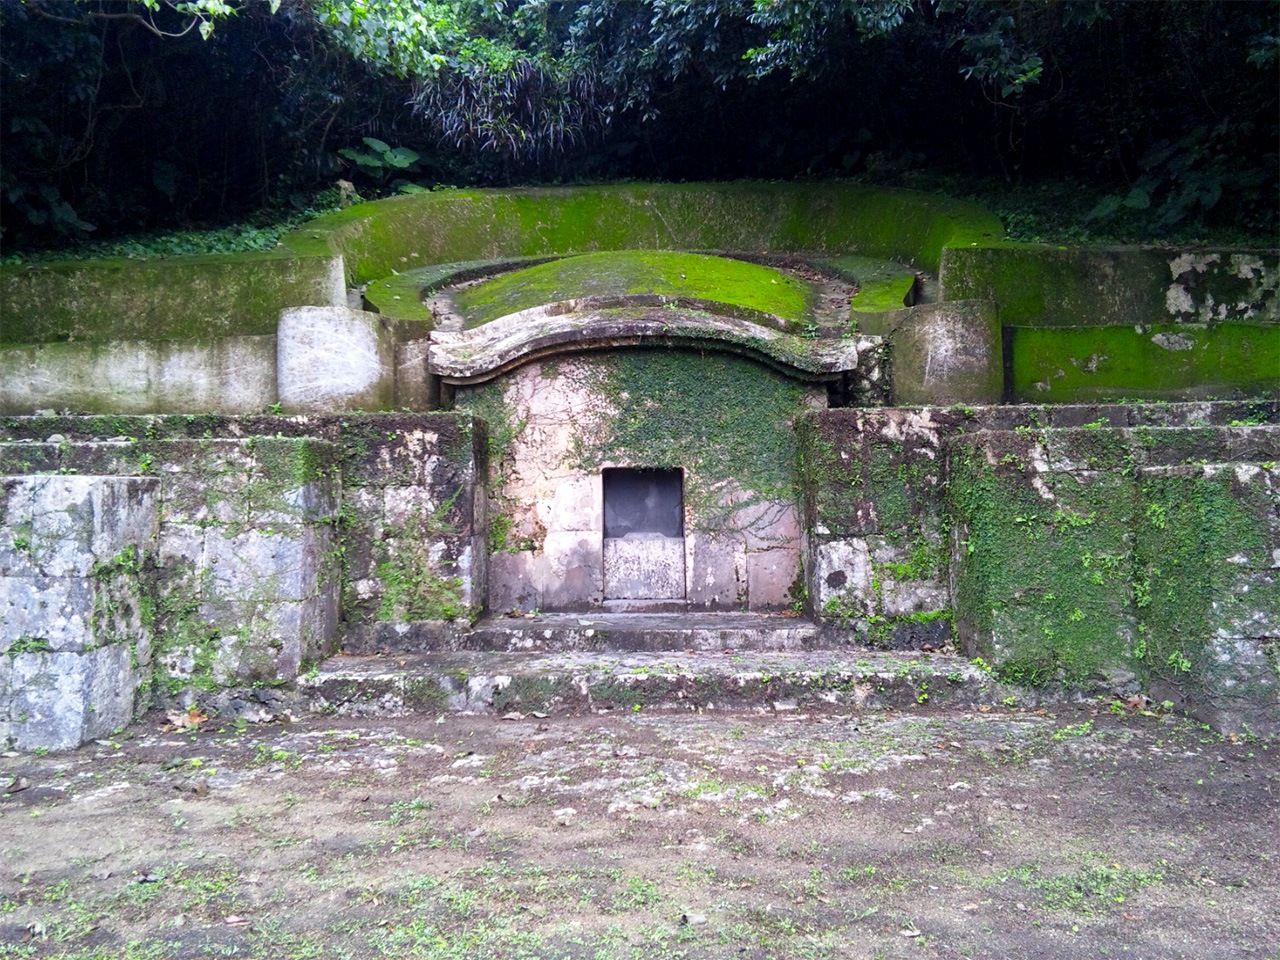 A kamekō-baka (turtleback tomb). These started to be built in the islands in the second half of the seventeenth century. They are thought to have originated in Fujian. They are not individual graves but family crypts. (Photo by the author)